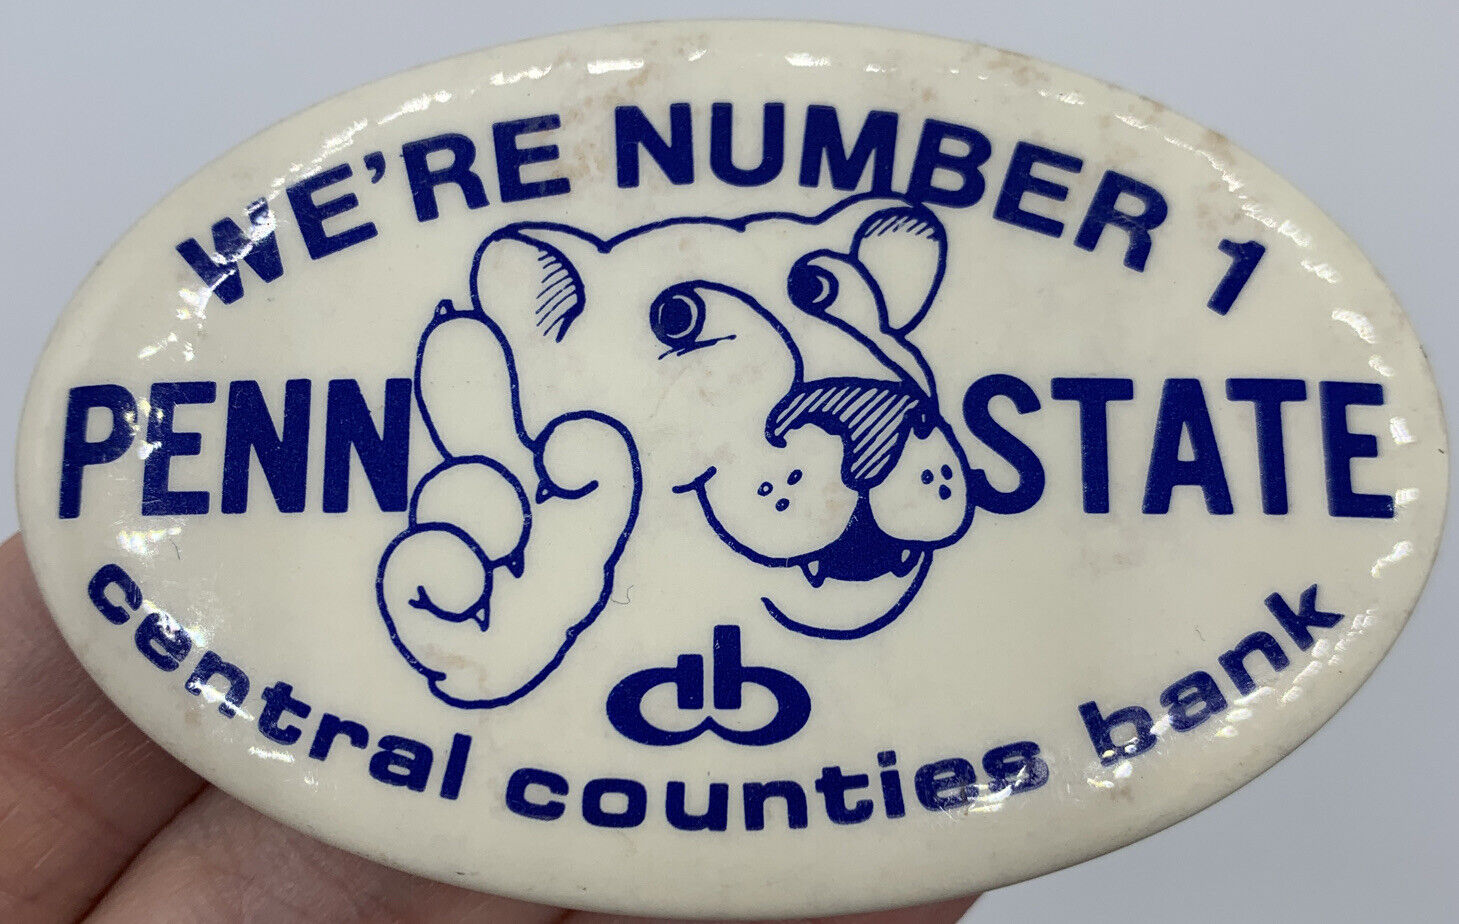 Penn State University College Pin Number 1 Central Bank 2.75” Football Vintage